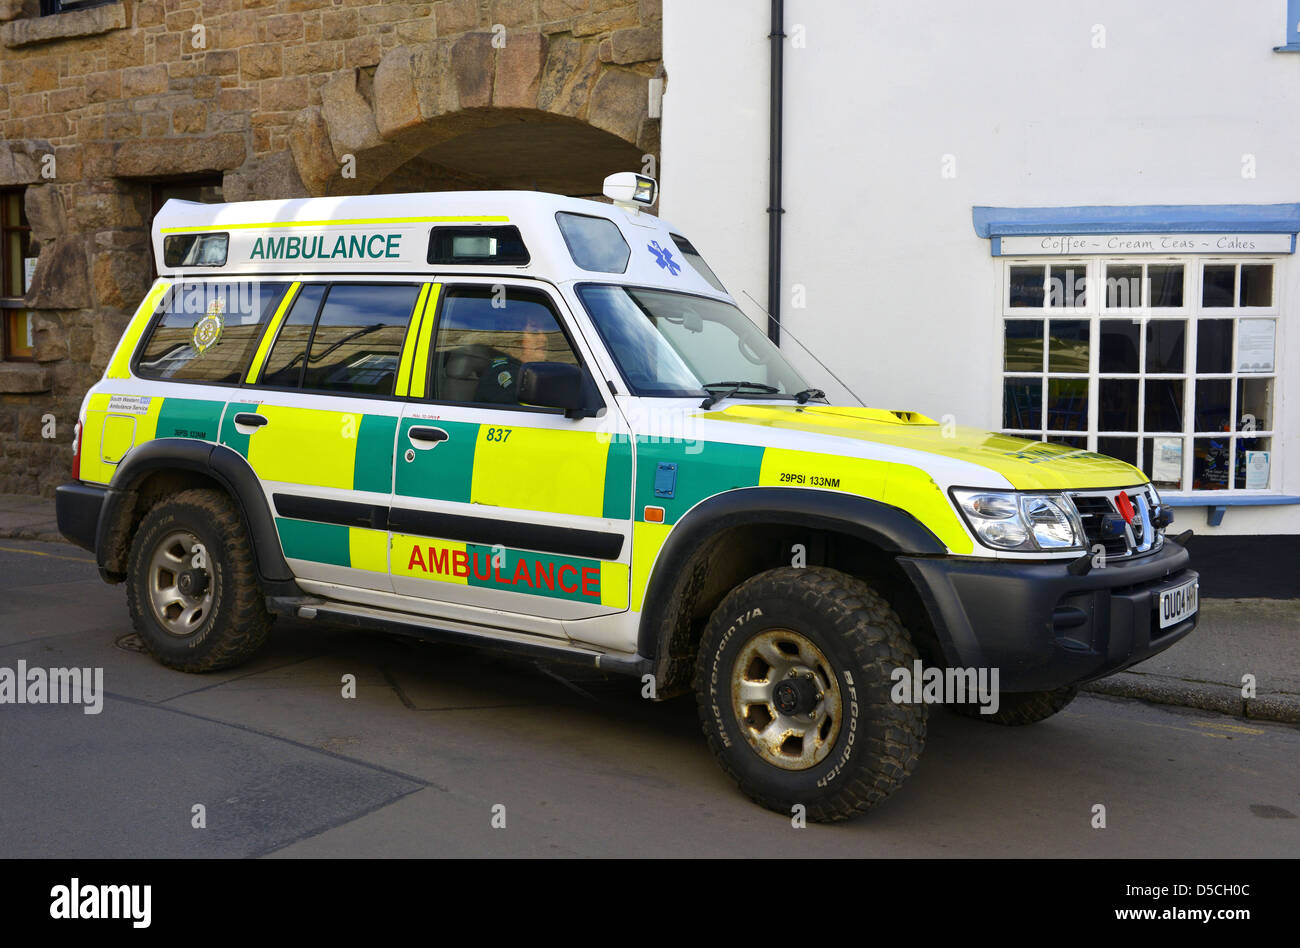 Ambulance vehicle based on St Mary's, Isles of Scilly, Britain. Stock Photo